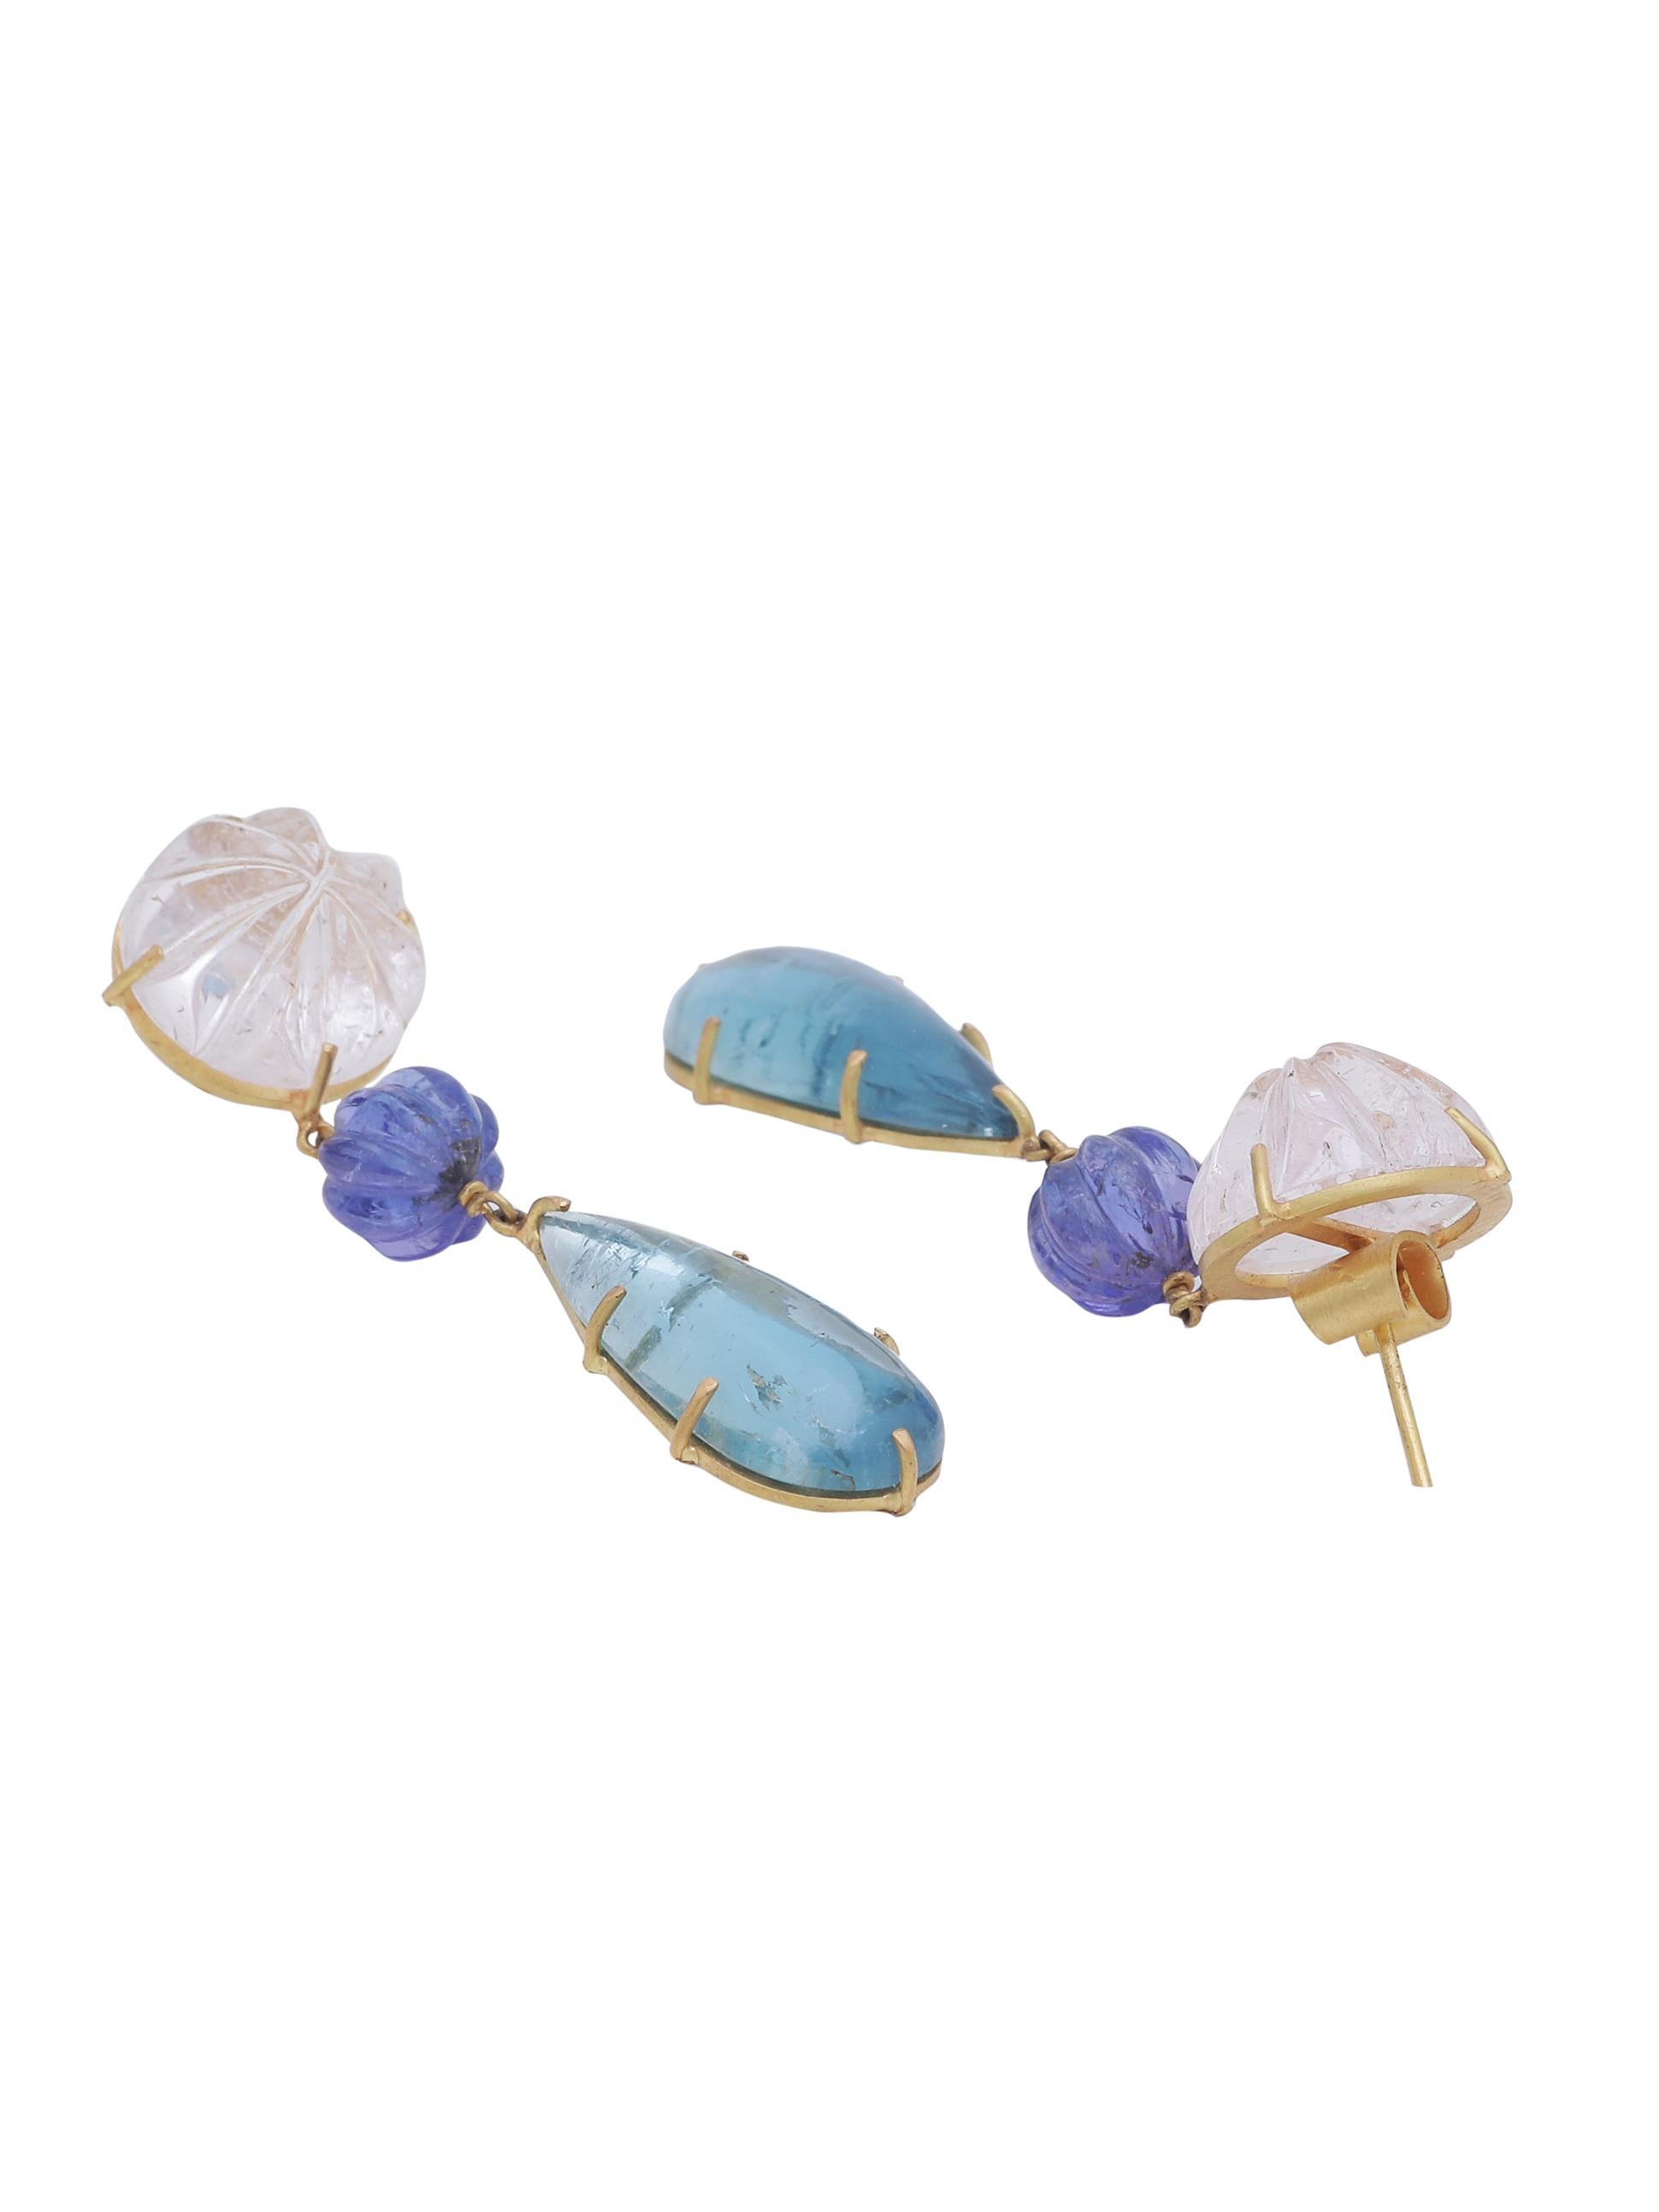 A pair of earrings hand crafted in 22K matte finish gold. The earring has a beautiful hand carved Kunzite on top, in the centre is a pair of Tanzanite carved bead and a nice pear shape aquamarine cabochon pair dangling at the end. 
All pastel colors